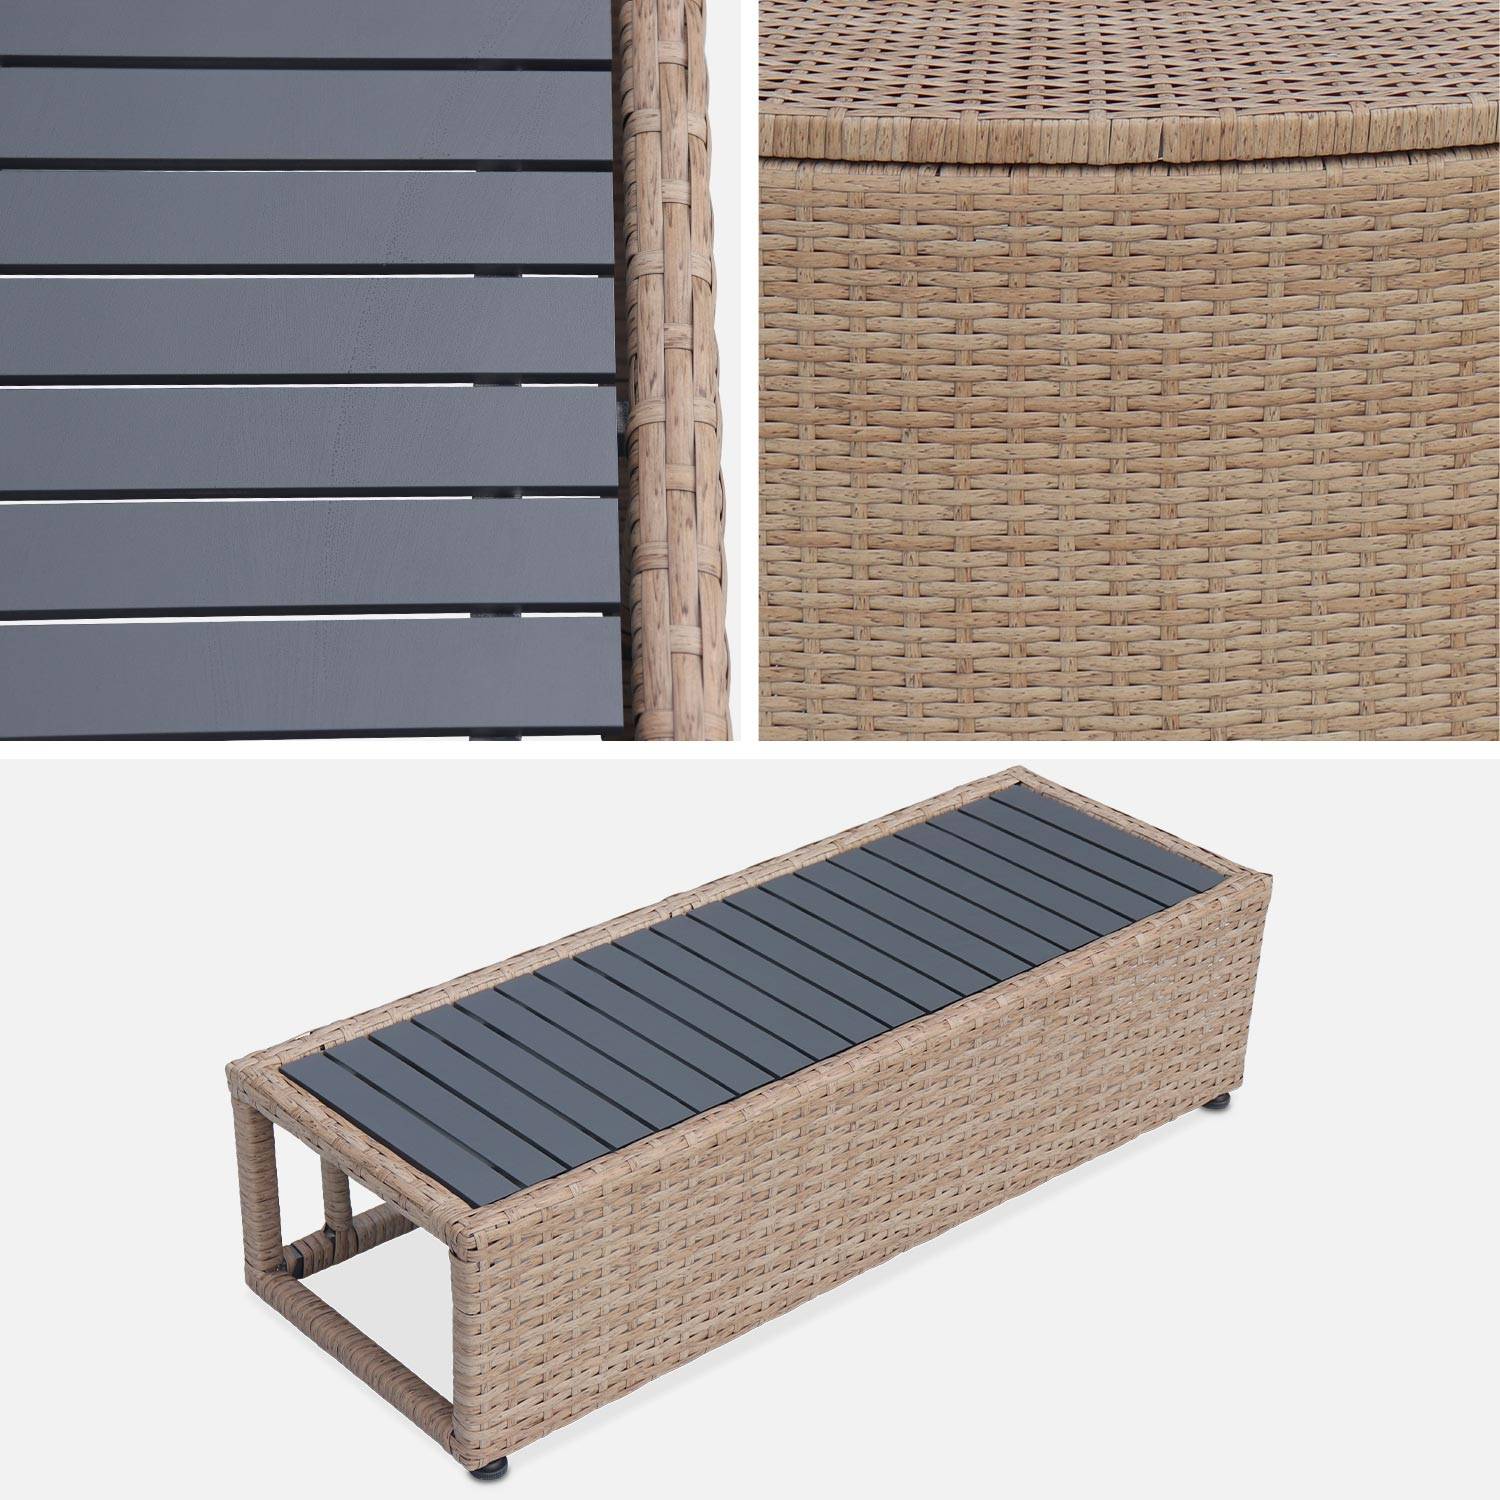 Natural polyrattan surround for square hot tub with cabinet, shelf and footstep Photo6